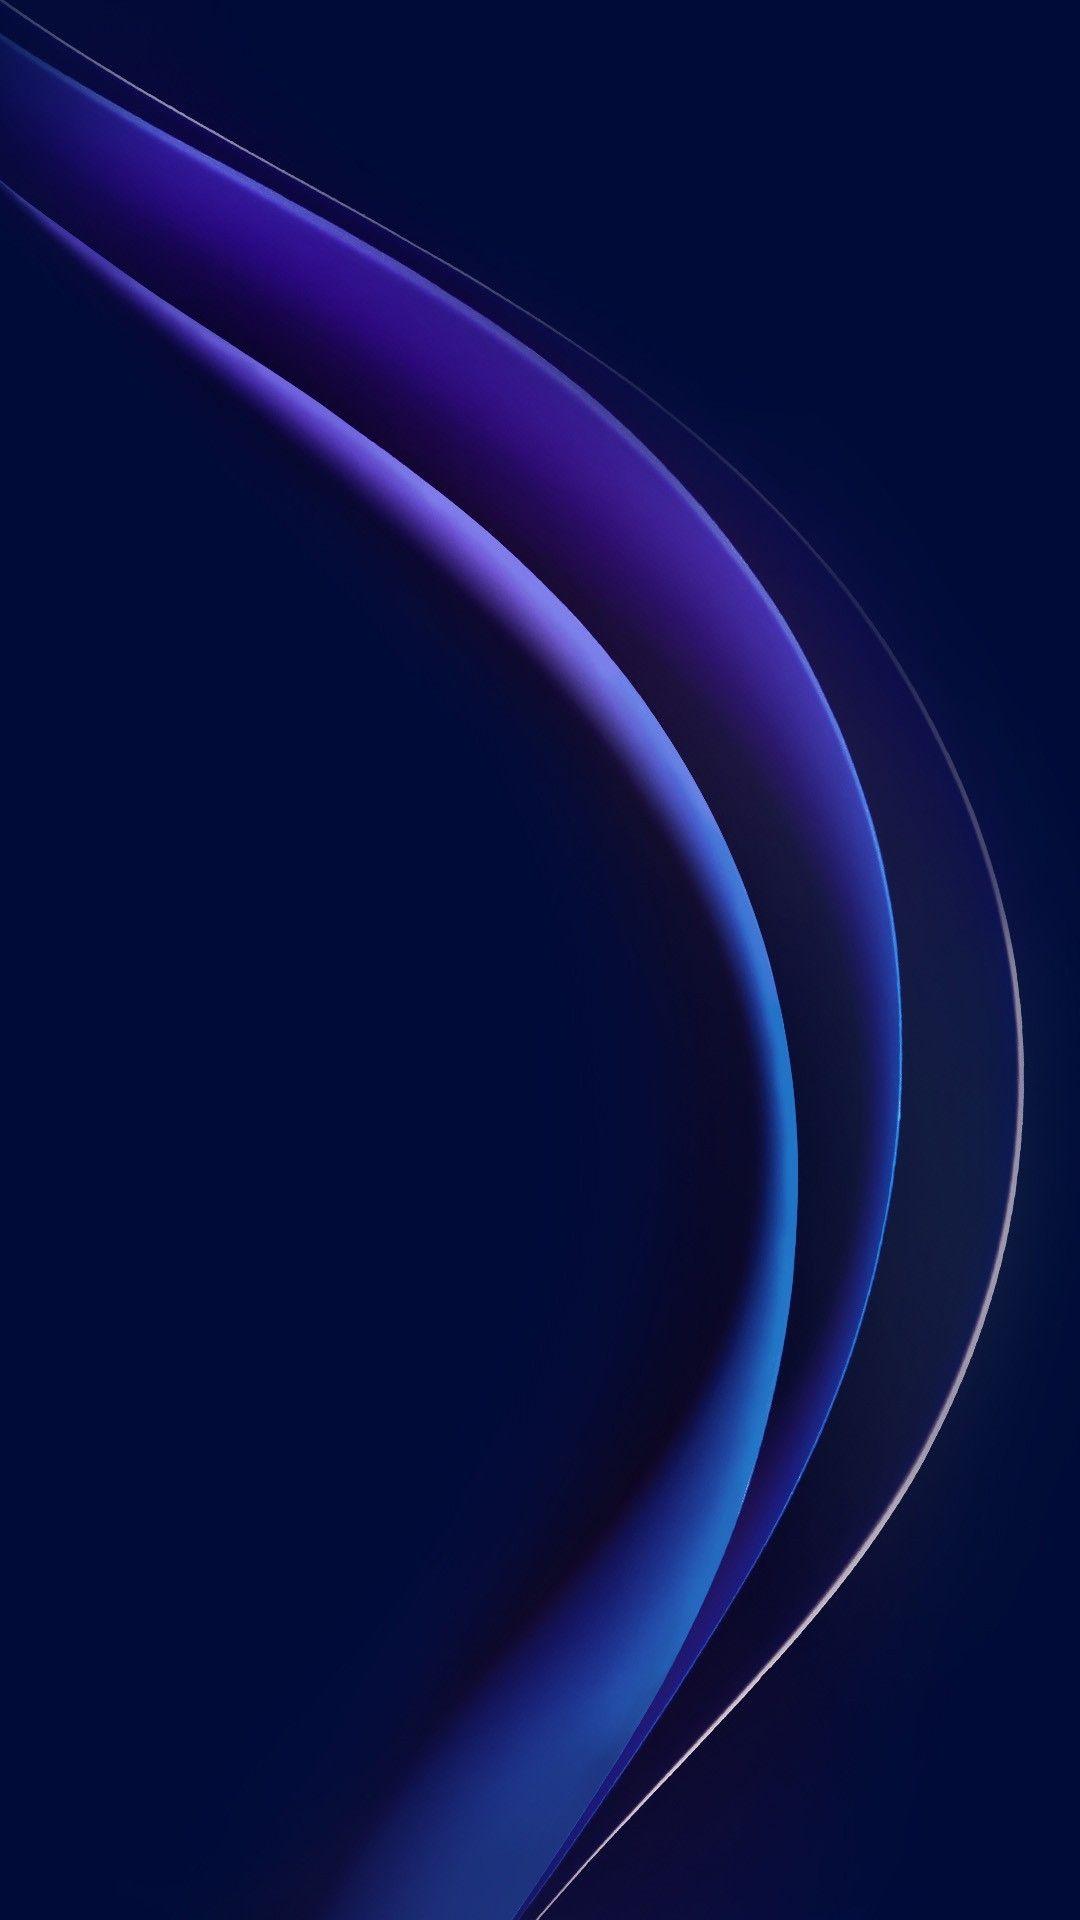 50+ High Quality Samsung Galaxy Note 10 & Note 10 Plus Wallpapers &  Backgrounds 2020 - Designbolts